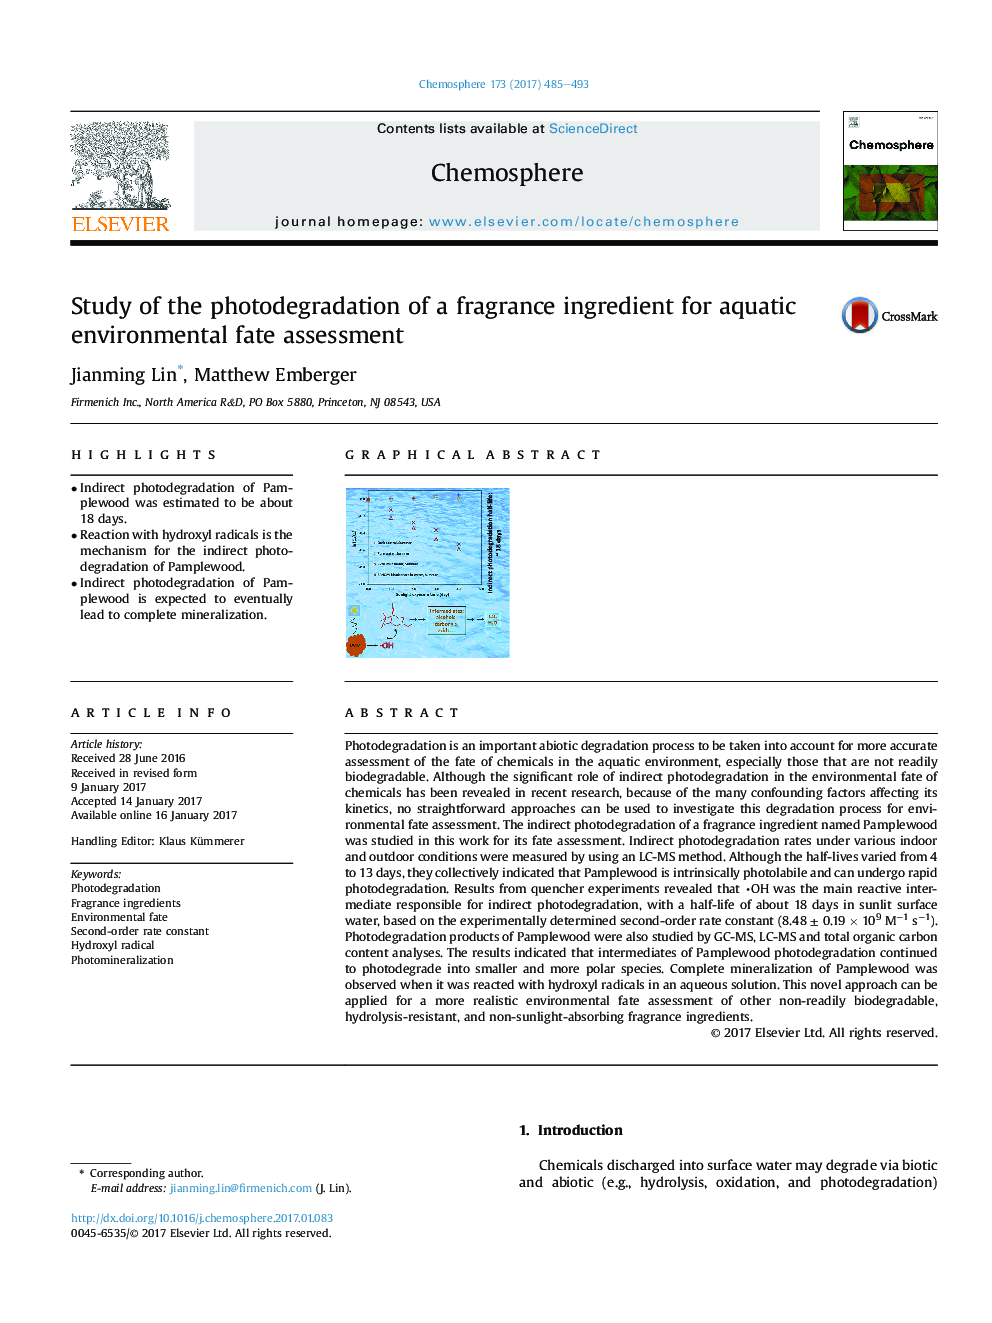 Study of the photodegradation of a fragrance ingredient for aquatic environmental fate assessment